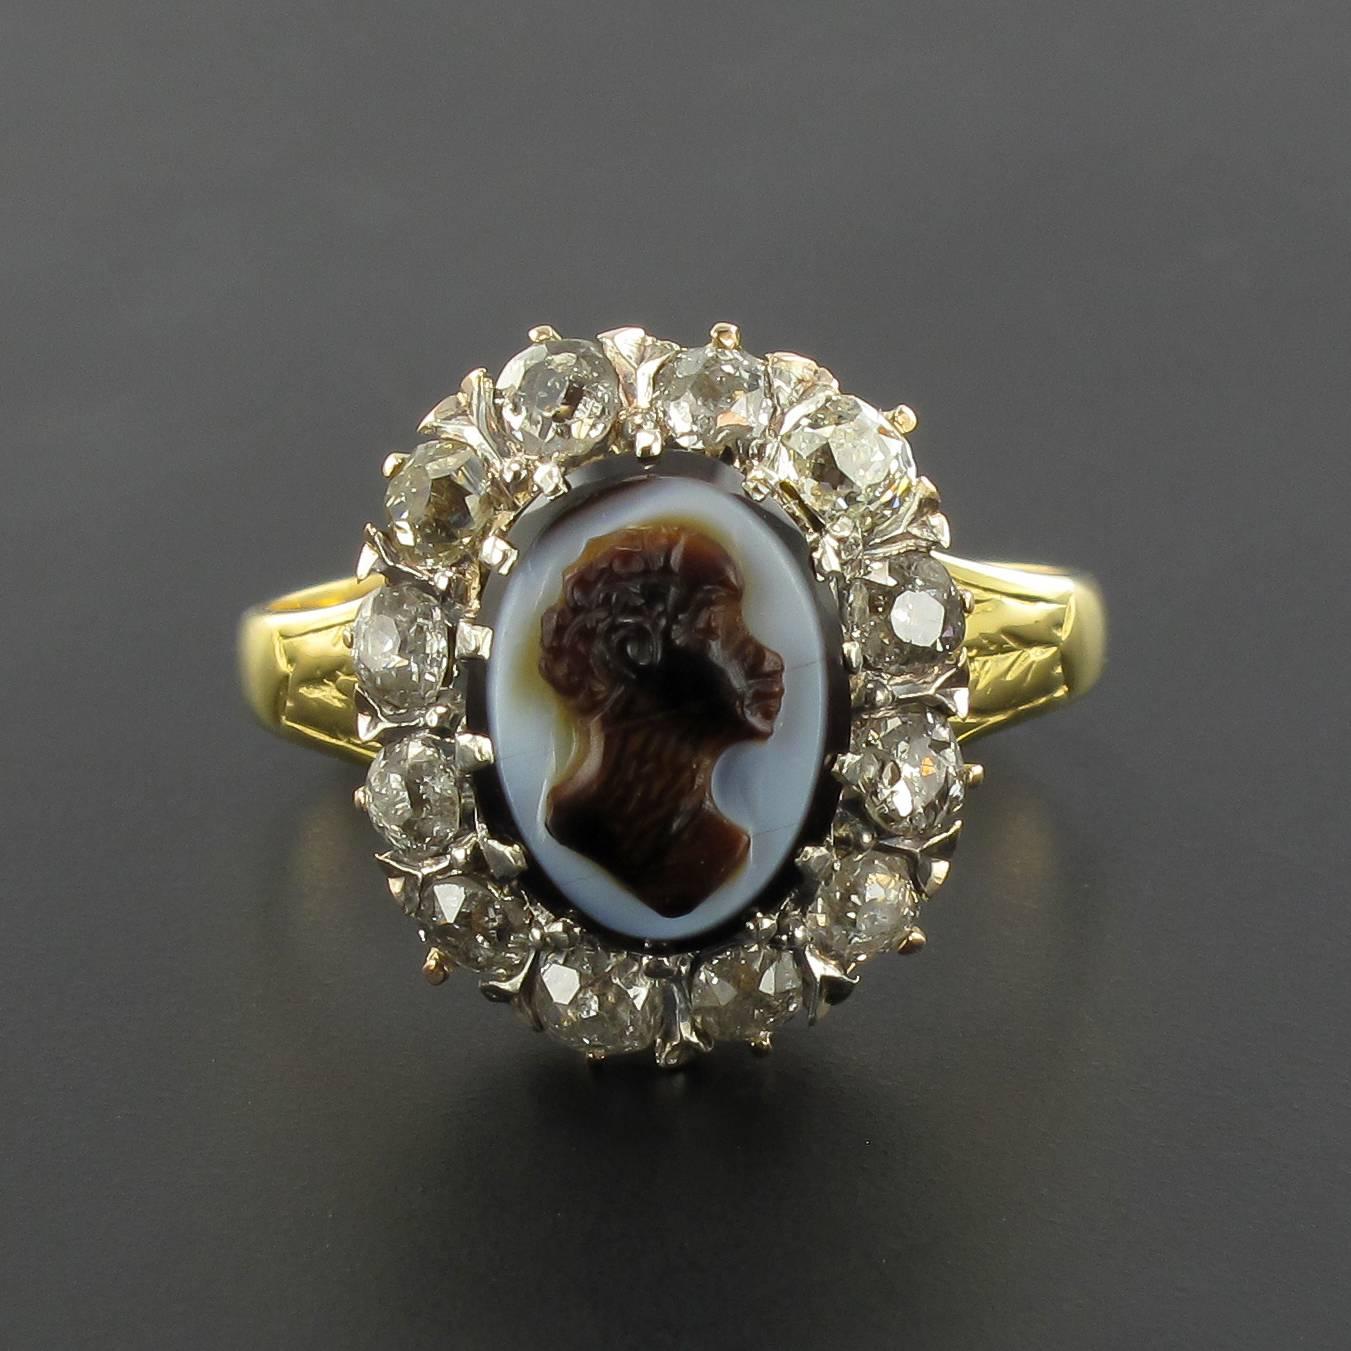 18 carat yellow gold ring, eagle head hallmark. 

This rare and splendid antique ring is claw set with a cameo on agate representing a man’s profile. The cameo is surrounded by 12 antique cut diamonds in an openwork mount. 
The beginning of the ring